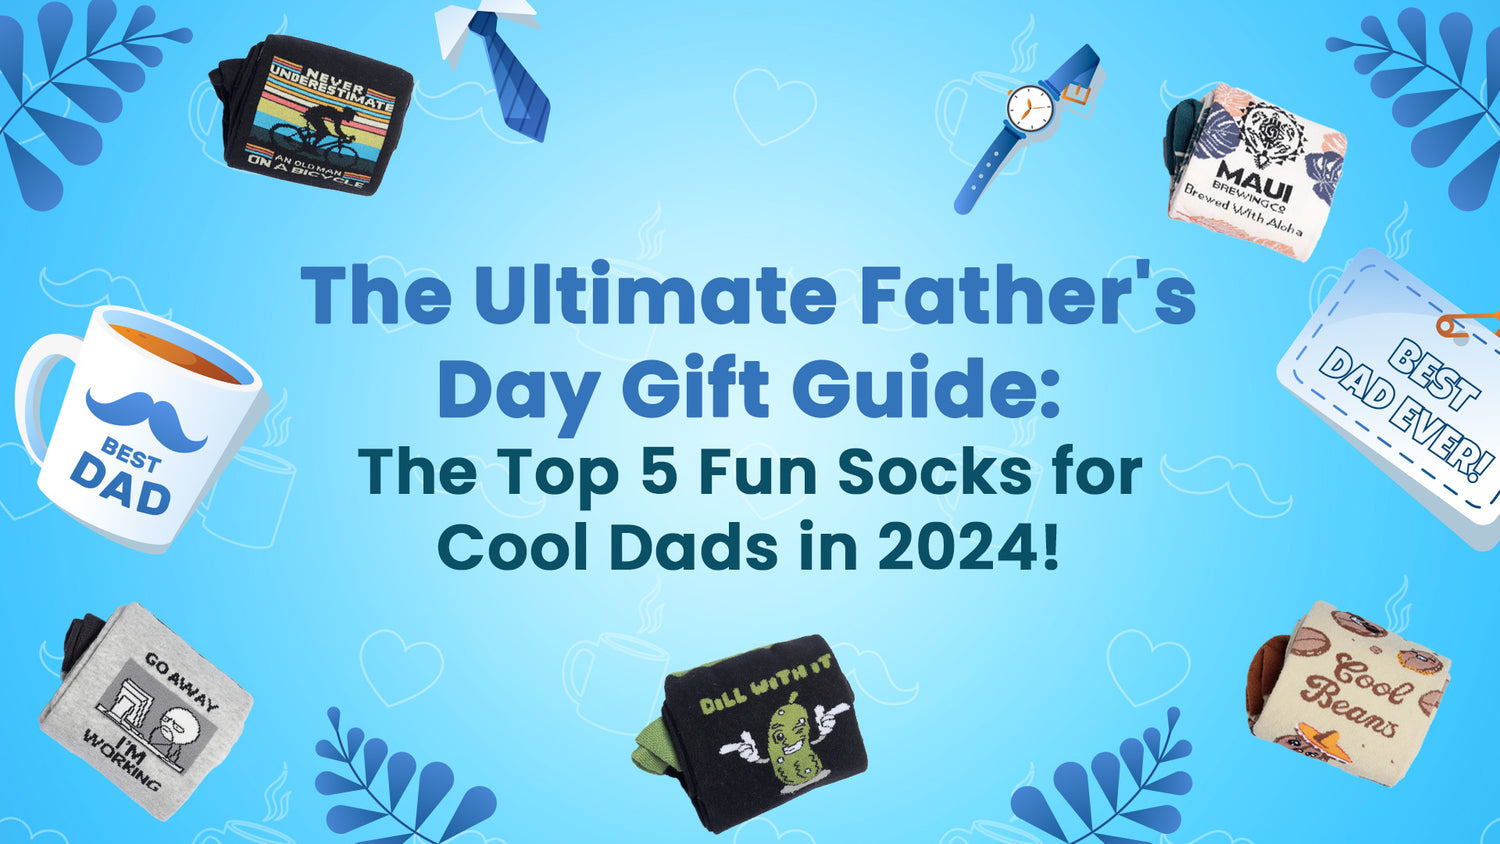 The Ultimate Father's Day Gift Guide: The Top 5 Fun Socks for Cool Dads in 2024!